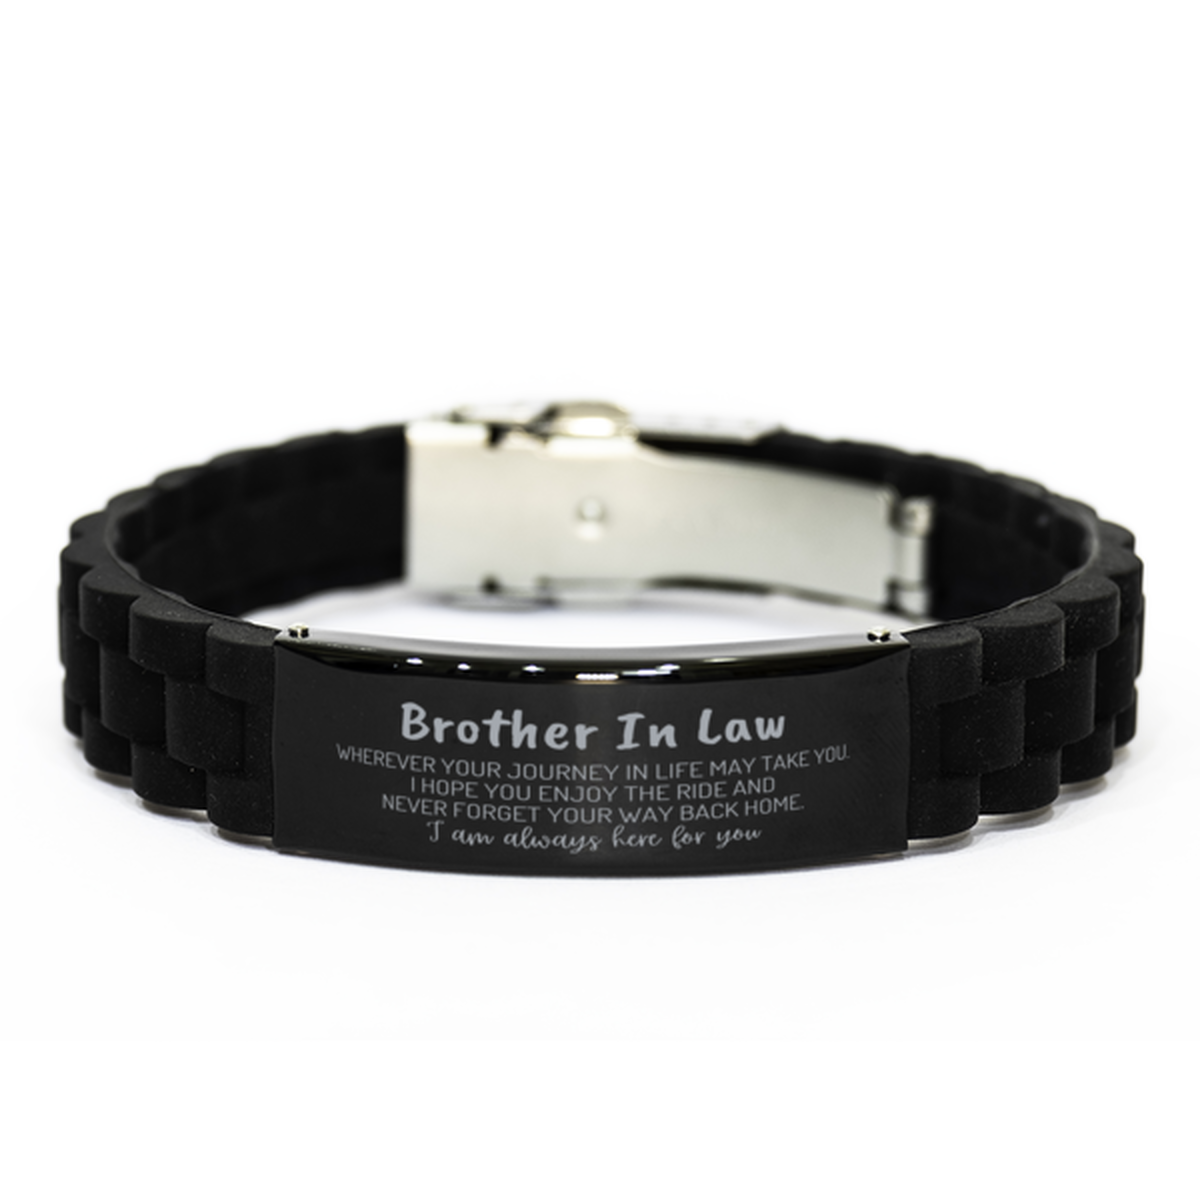 Brother In Law wherever your journey in life may take you, I am always here for you Brother In Law Black Glidelock Clasp Bracelet, Awesome Christmas Gifts For Brother In Law, Brother In Law Birthday Gifts for Men Women Family Loved One